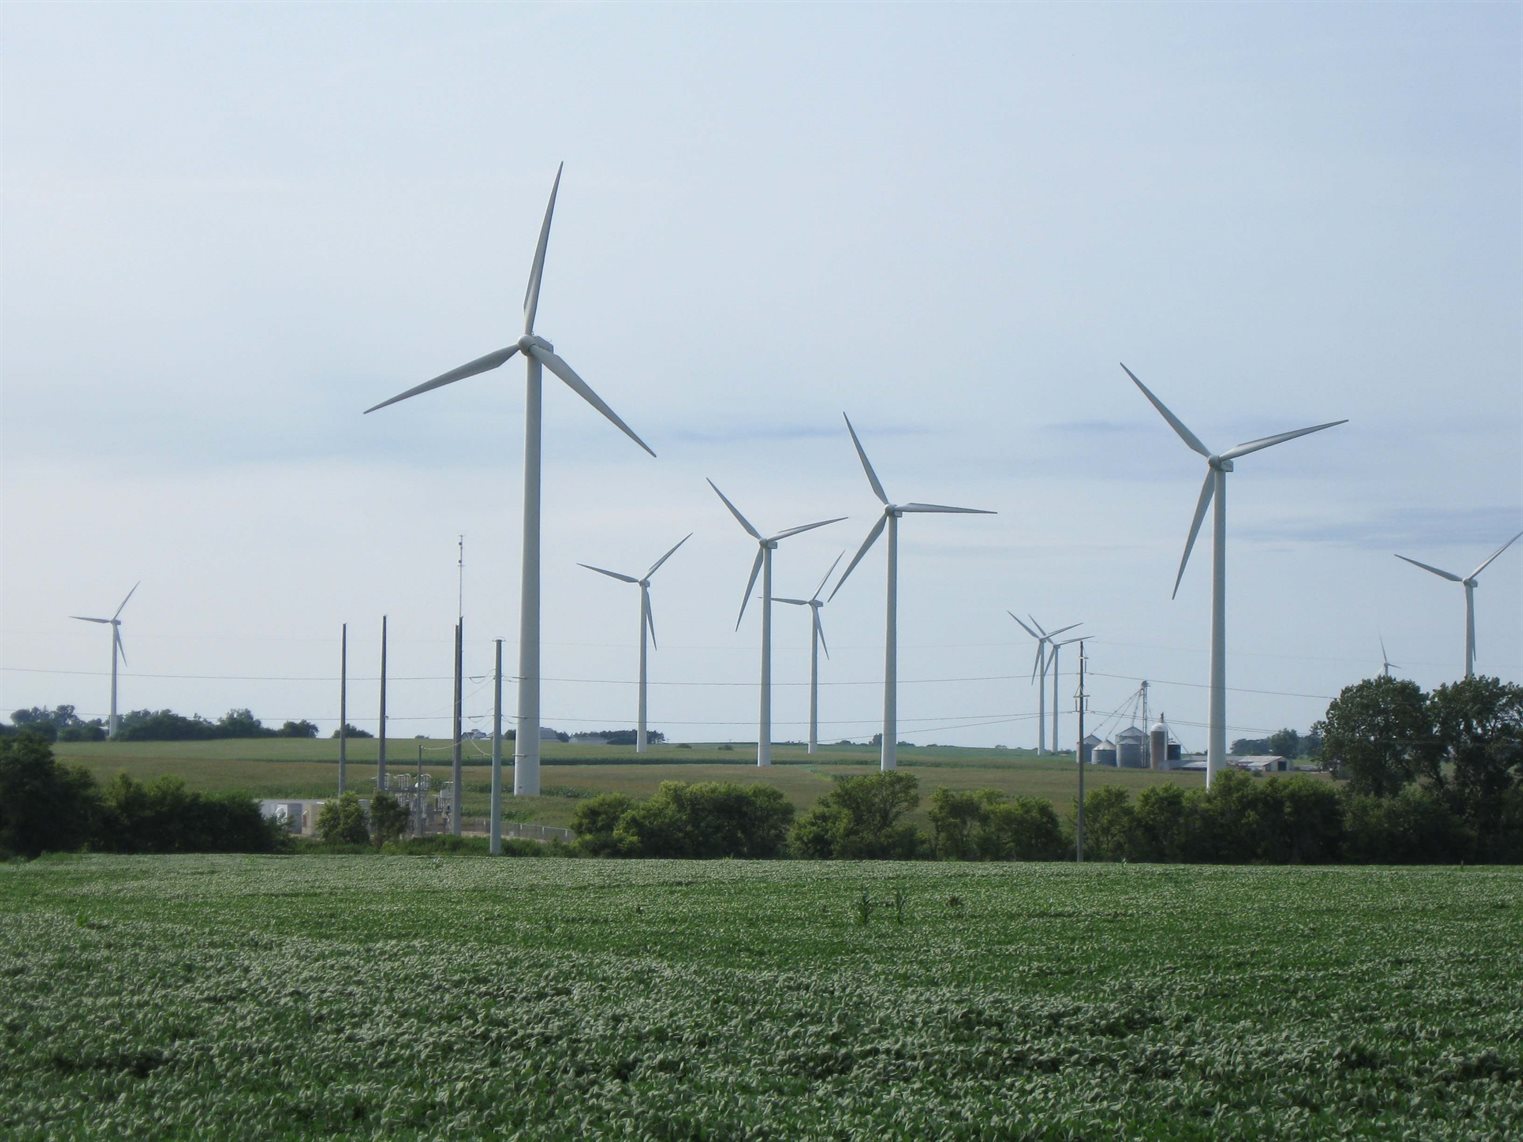 A field of mega-watt wind turbines in Illinois using Selig's patented airfoils. Over 16,500 turbines in this series were produced, many featuring Selig's designs.